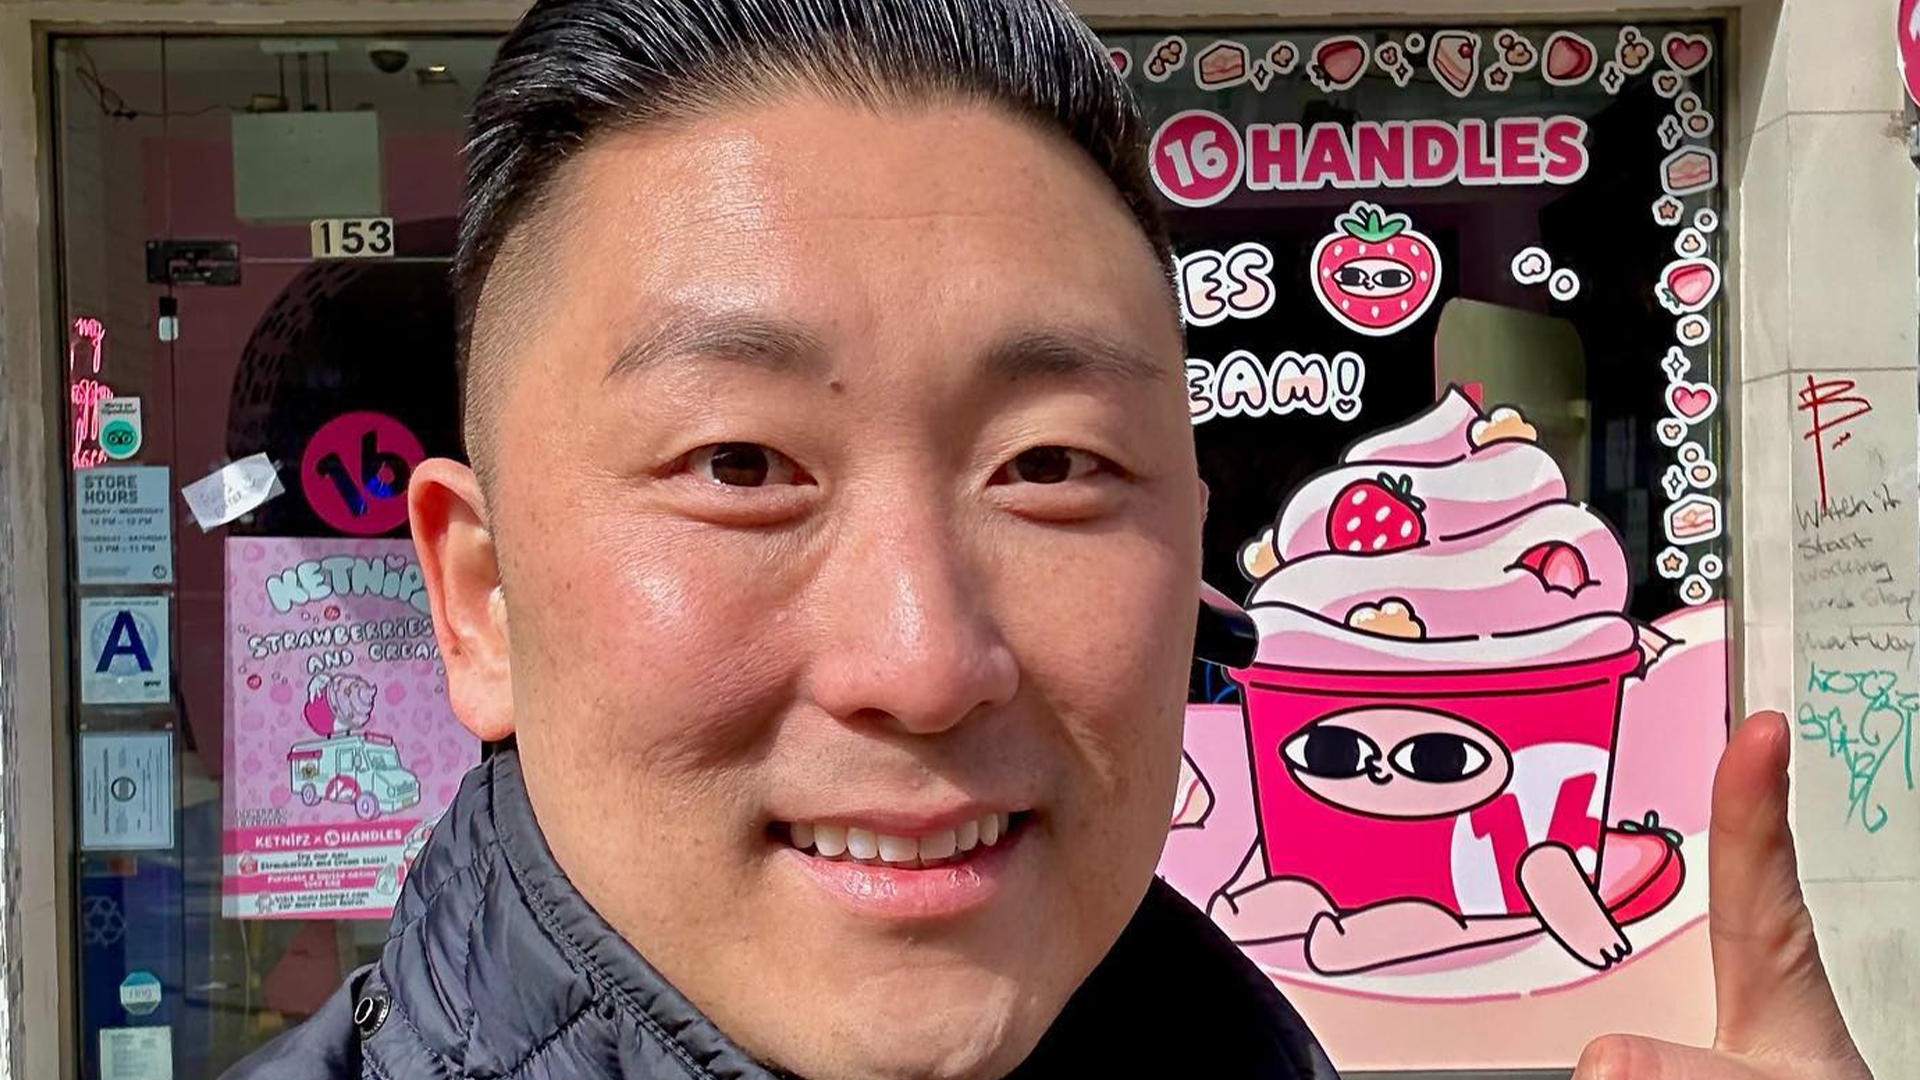 Restaurant chain founder Solomon Choi dead at age 44 after launching ‘visionary’ chain in his 20s that grew nationwide [Video]